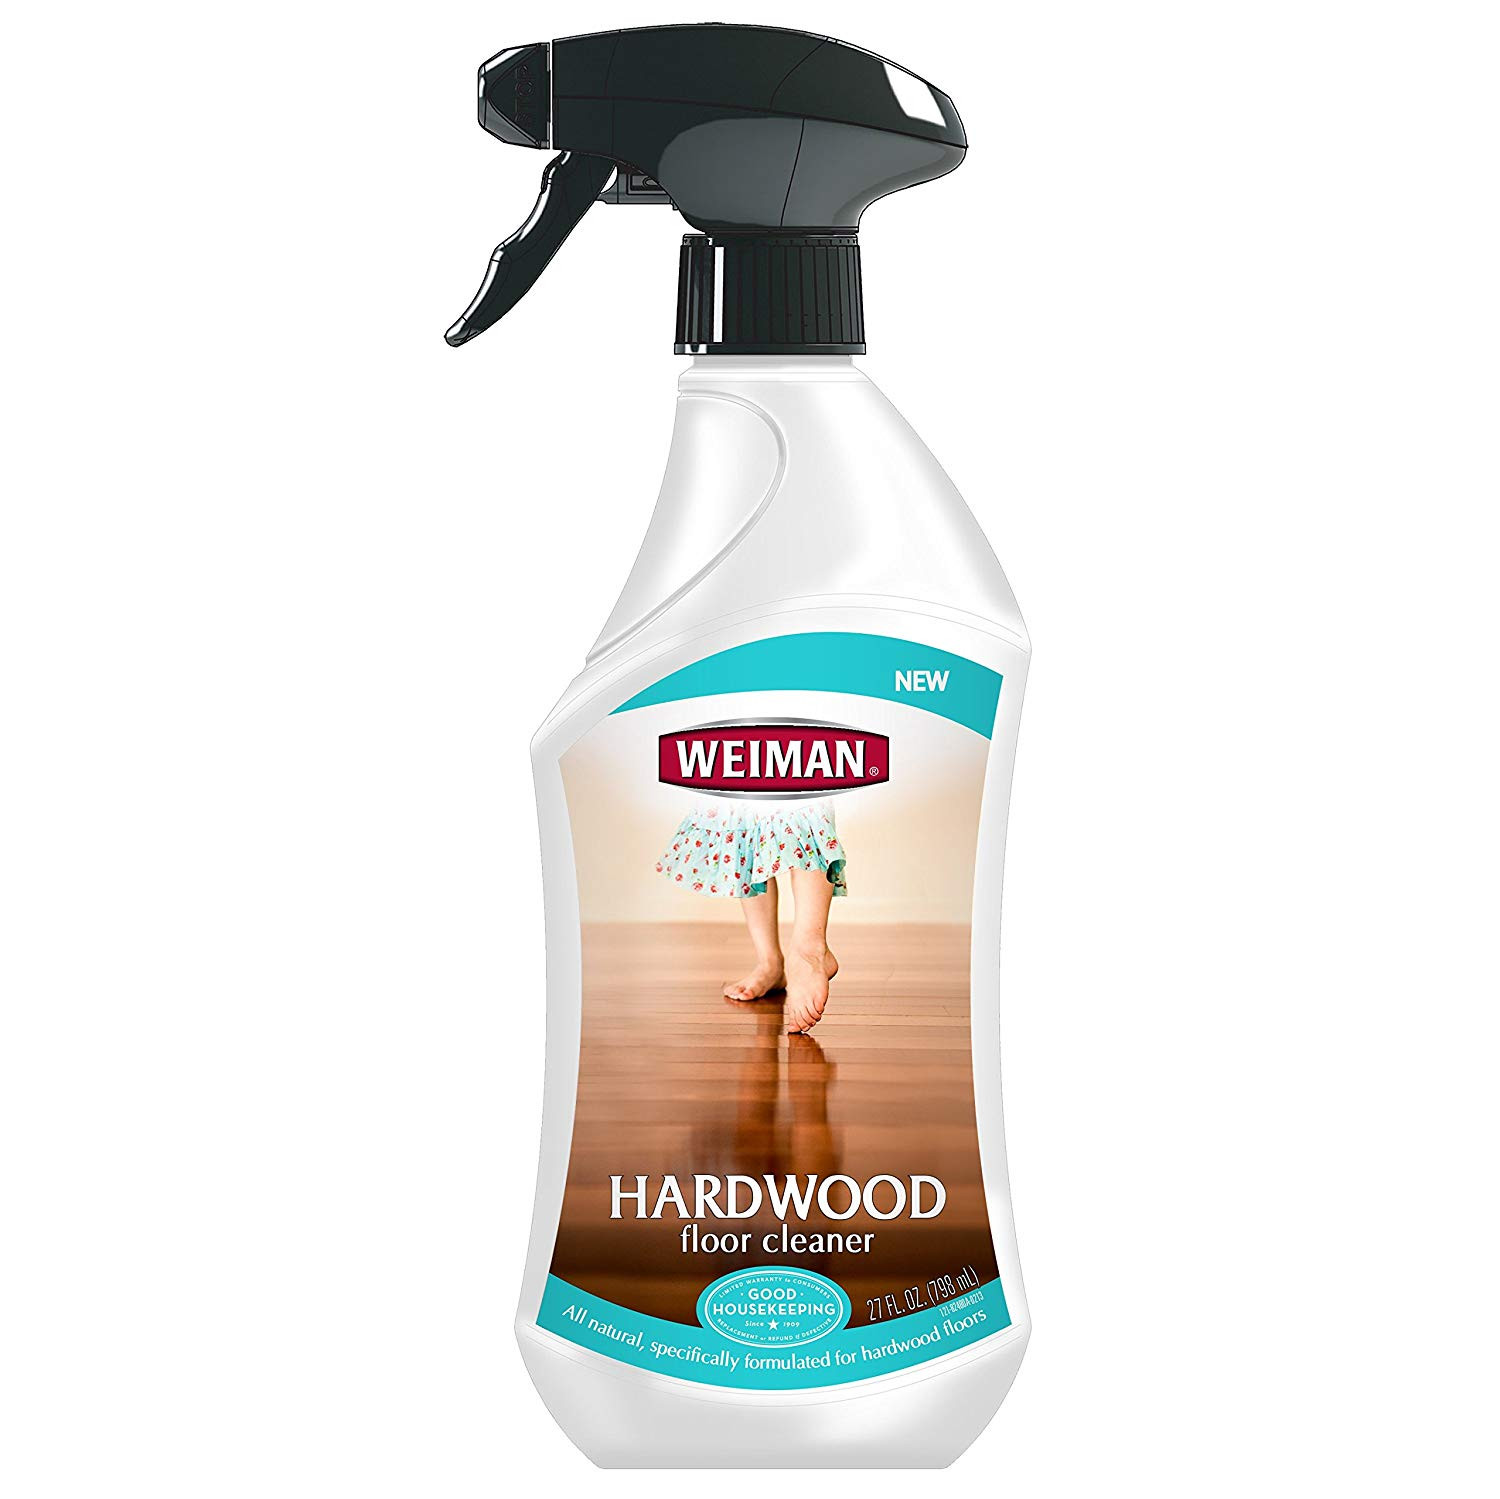 hardwood floor buffer cleaner of amazon com weiman hardwood floor cleaner surface safe no harsh for amazon com weiman hardwood floor cleaner surface safe no harsh scent safe for use around kids and pets residue free 27 oz trigger home kitchen